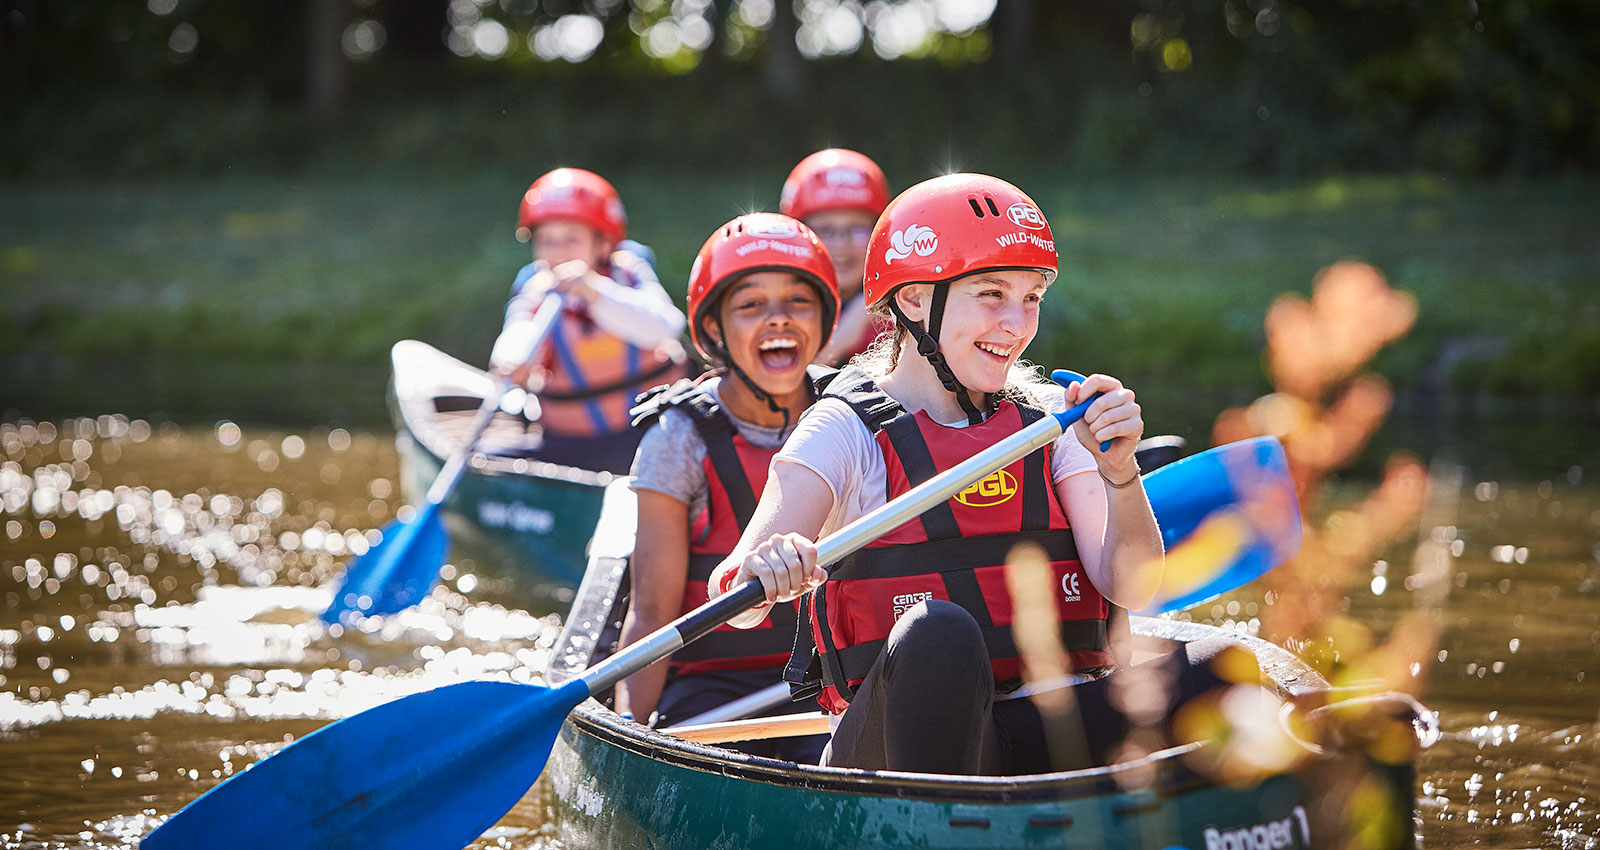 Outdoor Education - Activities and Adventure for Secondary School Groups